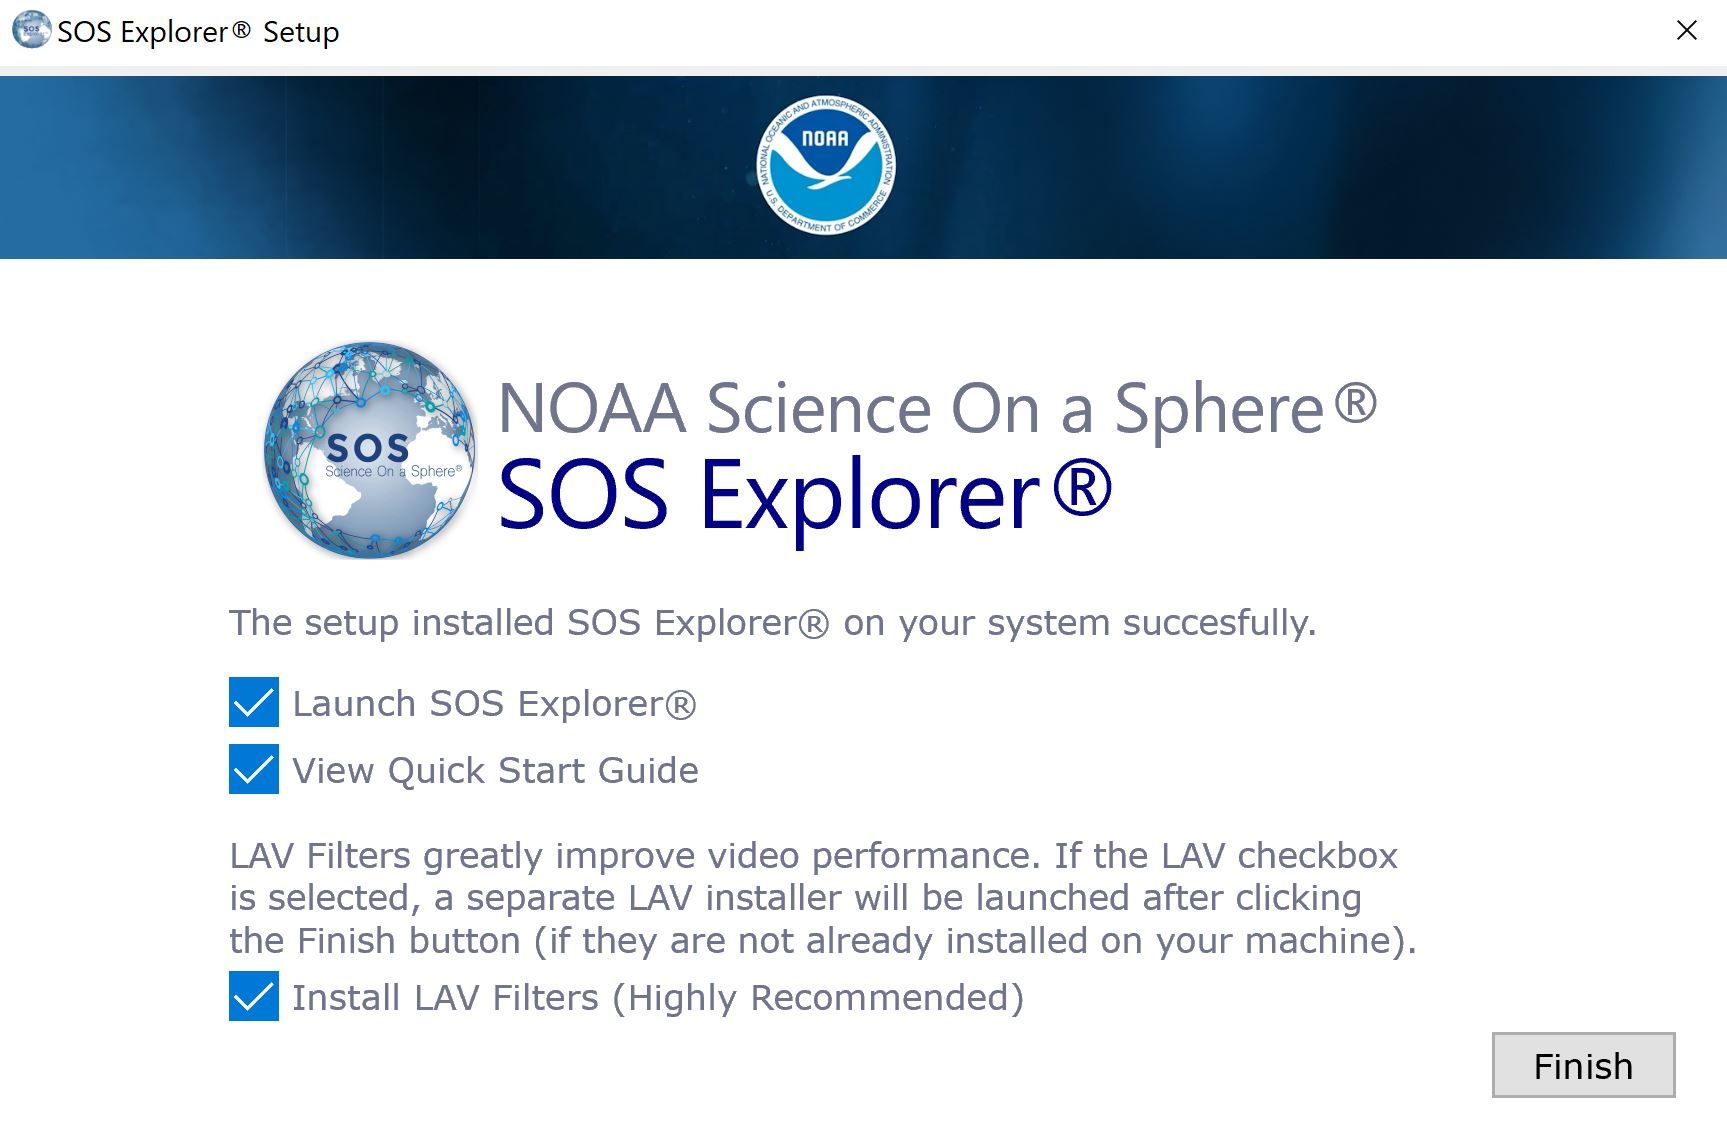 Shows the SOS Explorer® Install complete screen. Users can launch SOS Explorer, 
    View the Quick Start Guide, or Install Lav Filter by selecting the options.